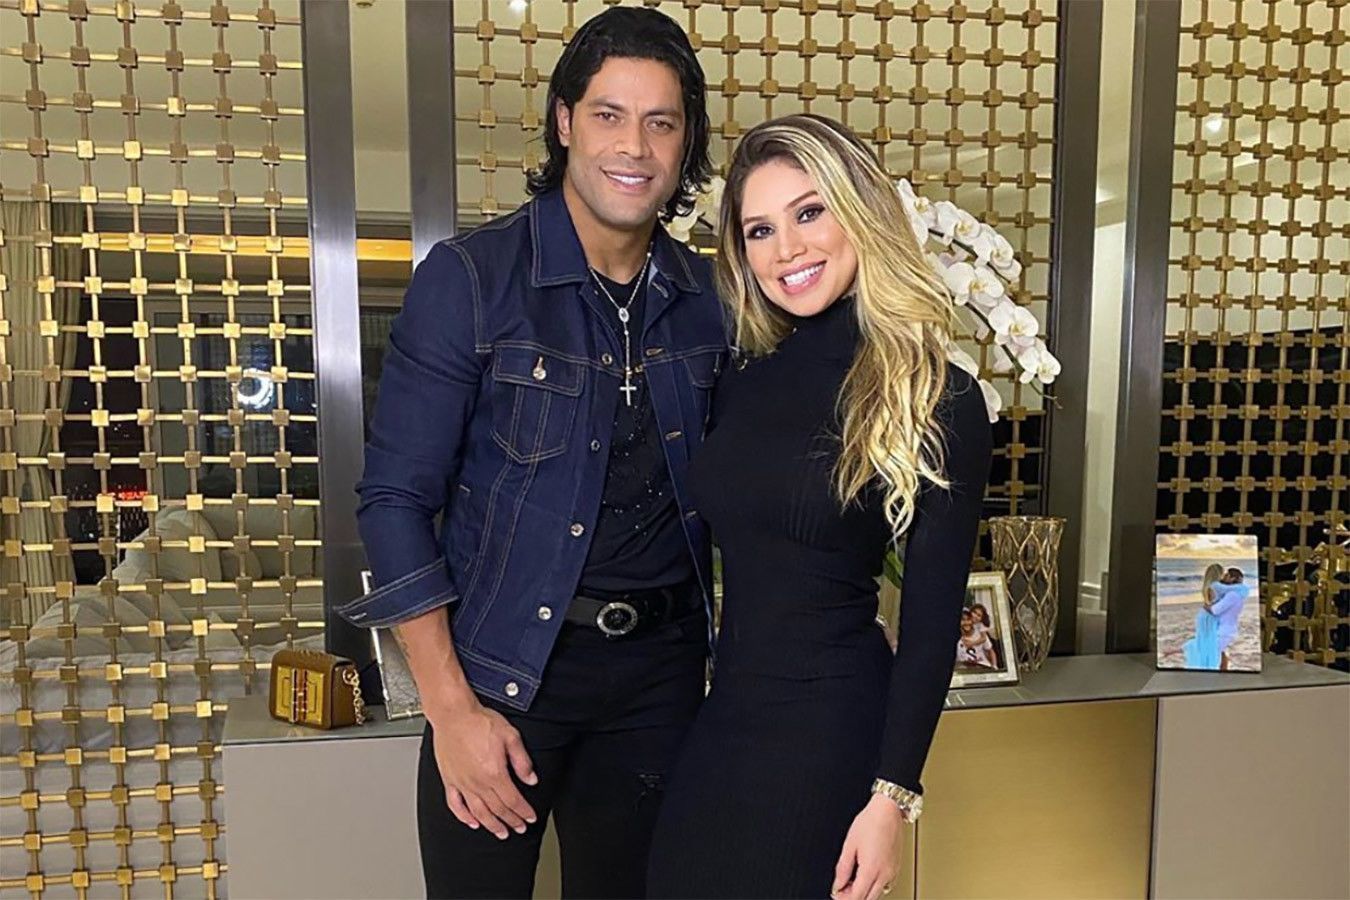 Hulk, who married his ex-wife's niece, welcomes a daughter